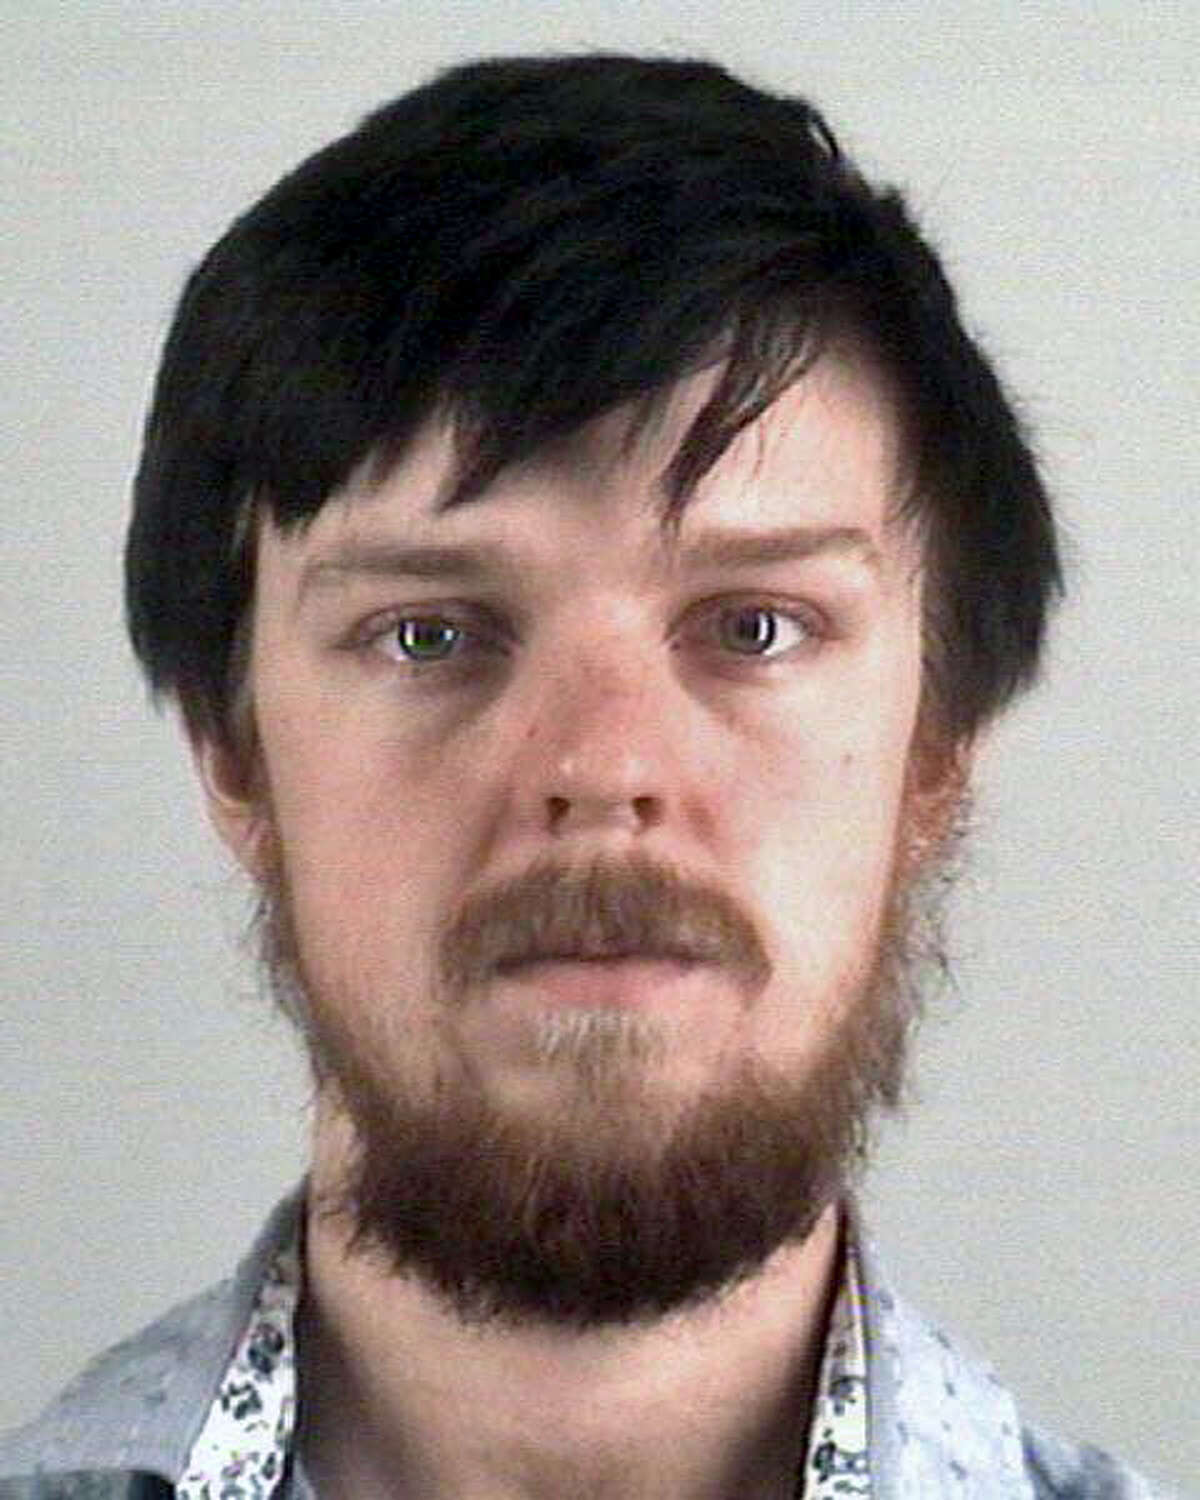 In this photo provided by the Tarrant County Sheriff's Department, Ethan Couch appears in a booking photo on February 5, 2016, in Fort Worth, Texas. 